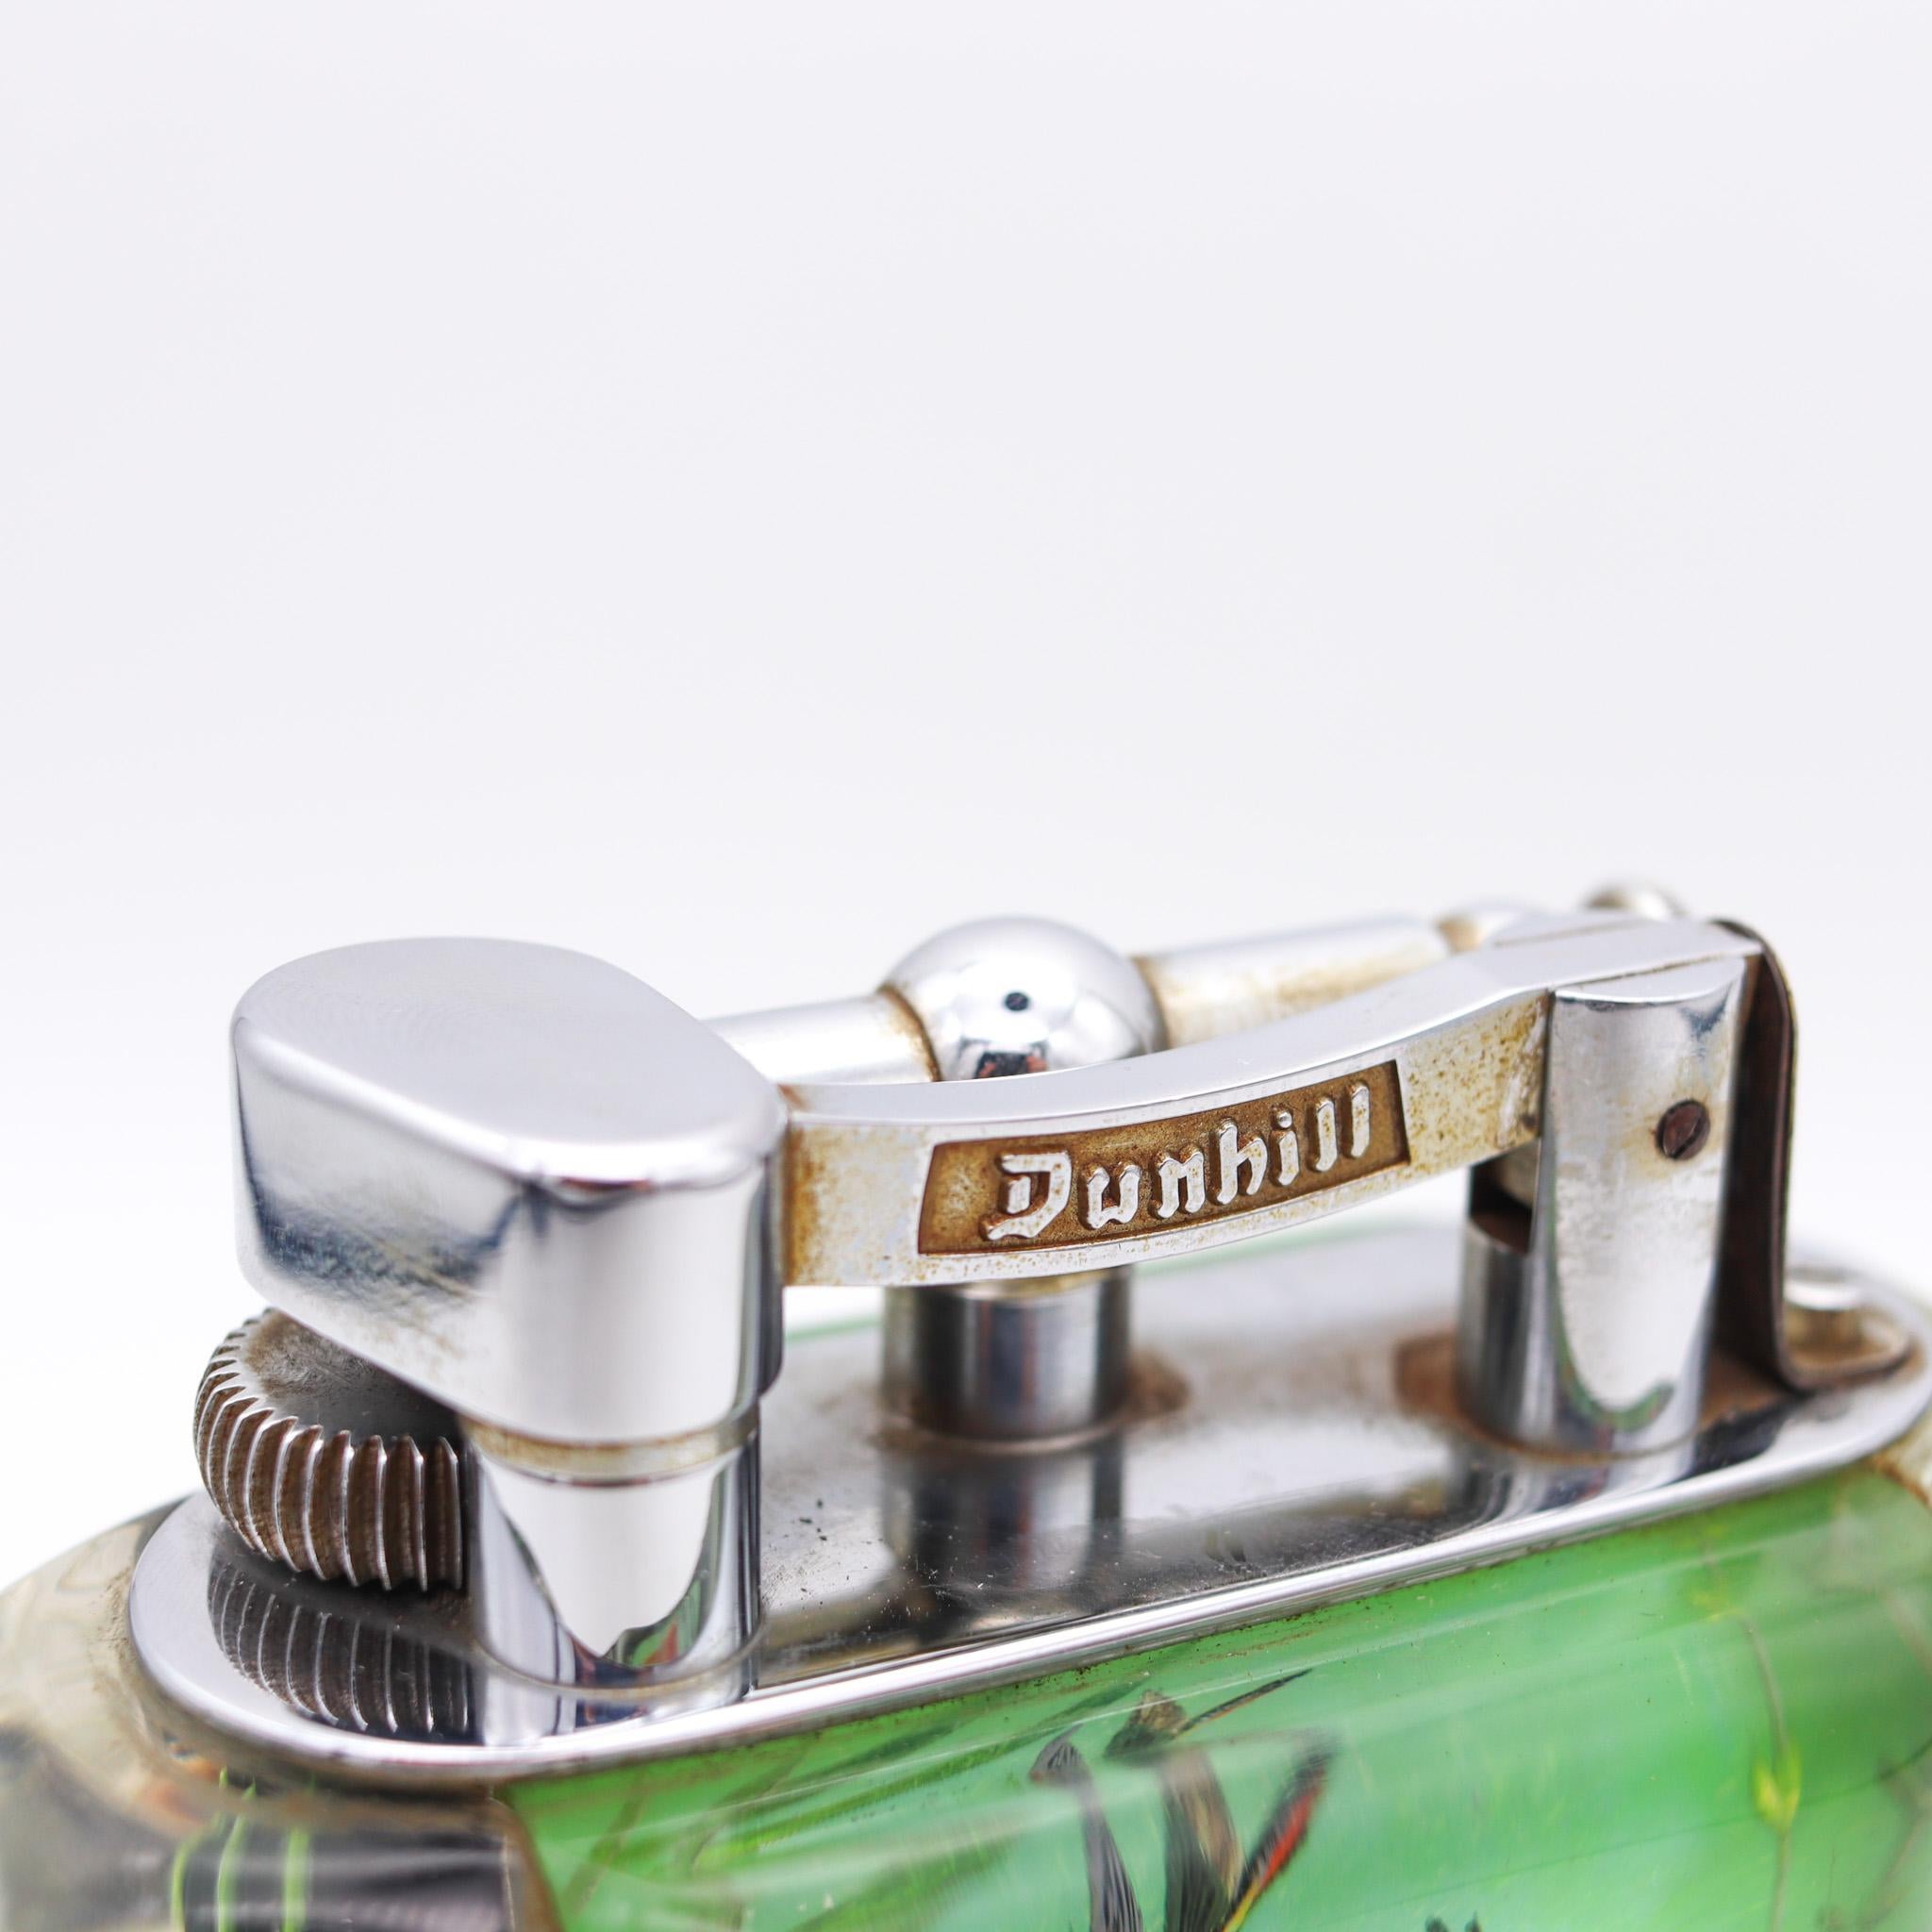 English Alfred Dunhill 1949 Standard Aquarium Lift Arm Petrol Lighter In Perspex Lucite  For Sale